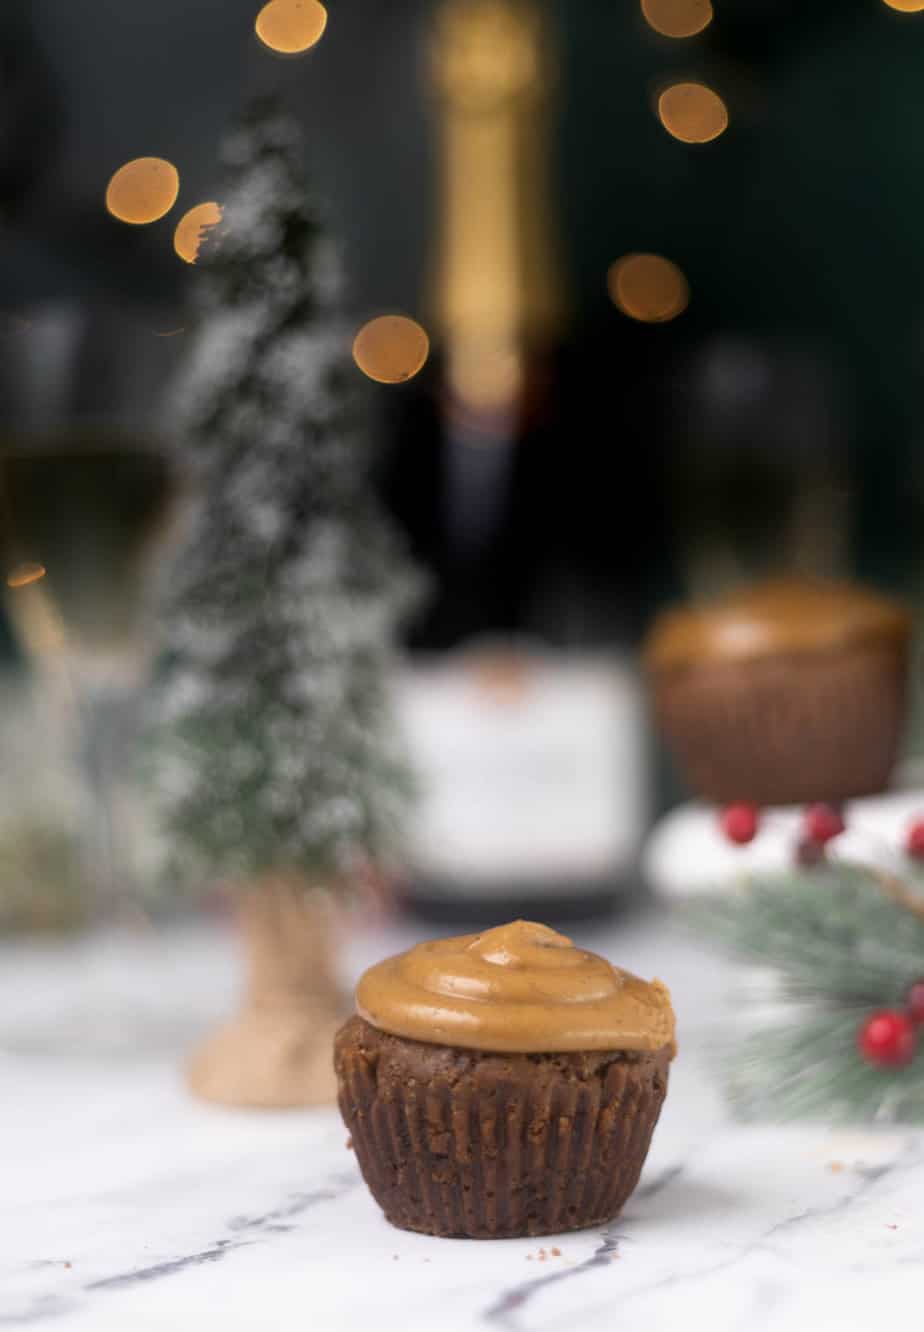 Gingerbread cupcake  with greenery for Christmas in the background 